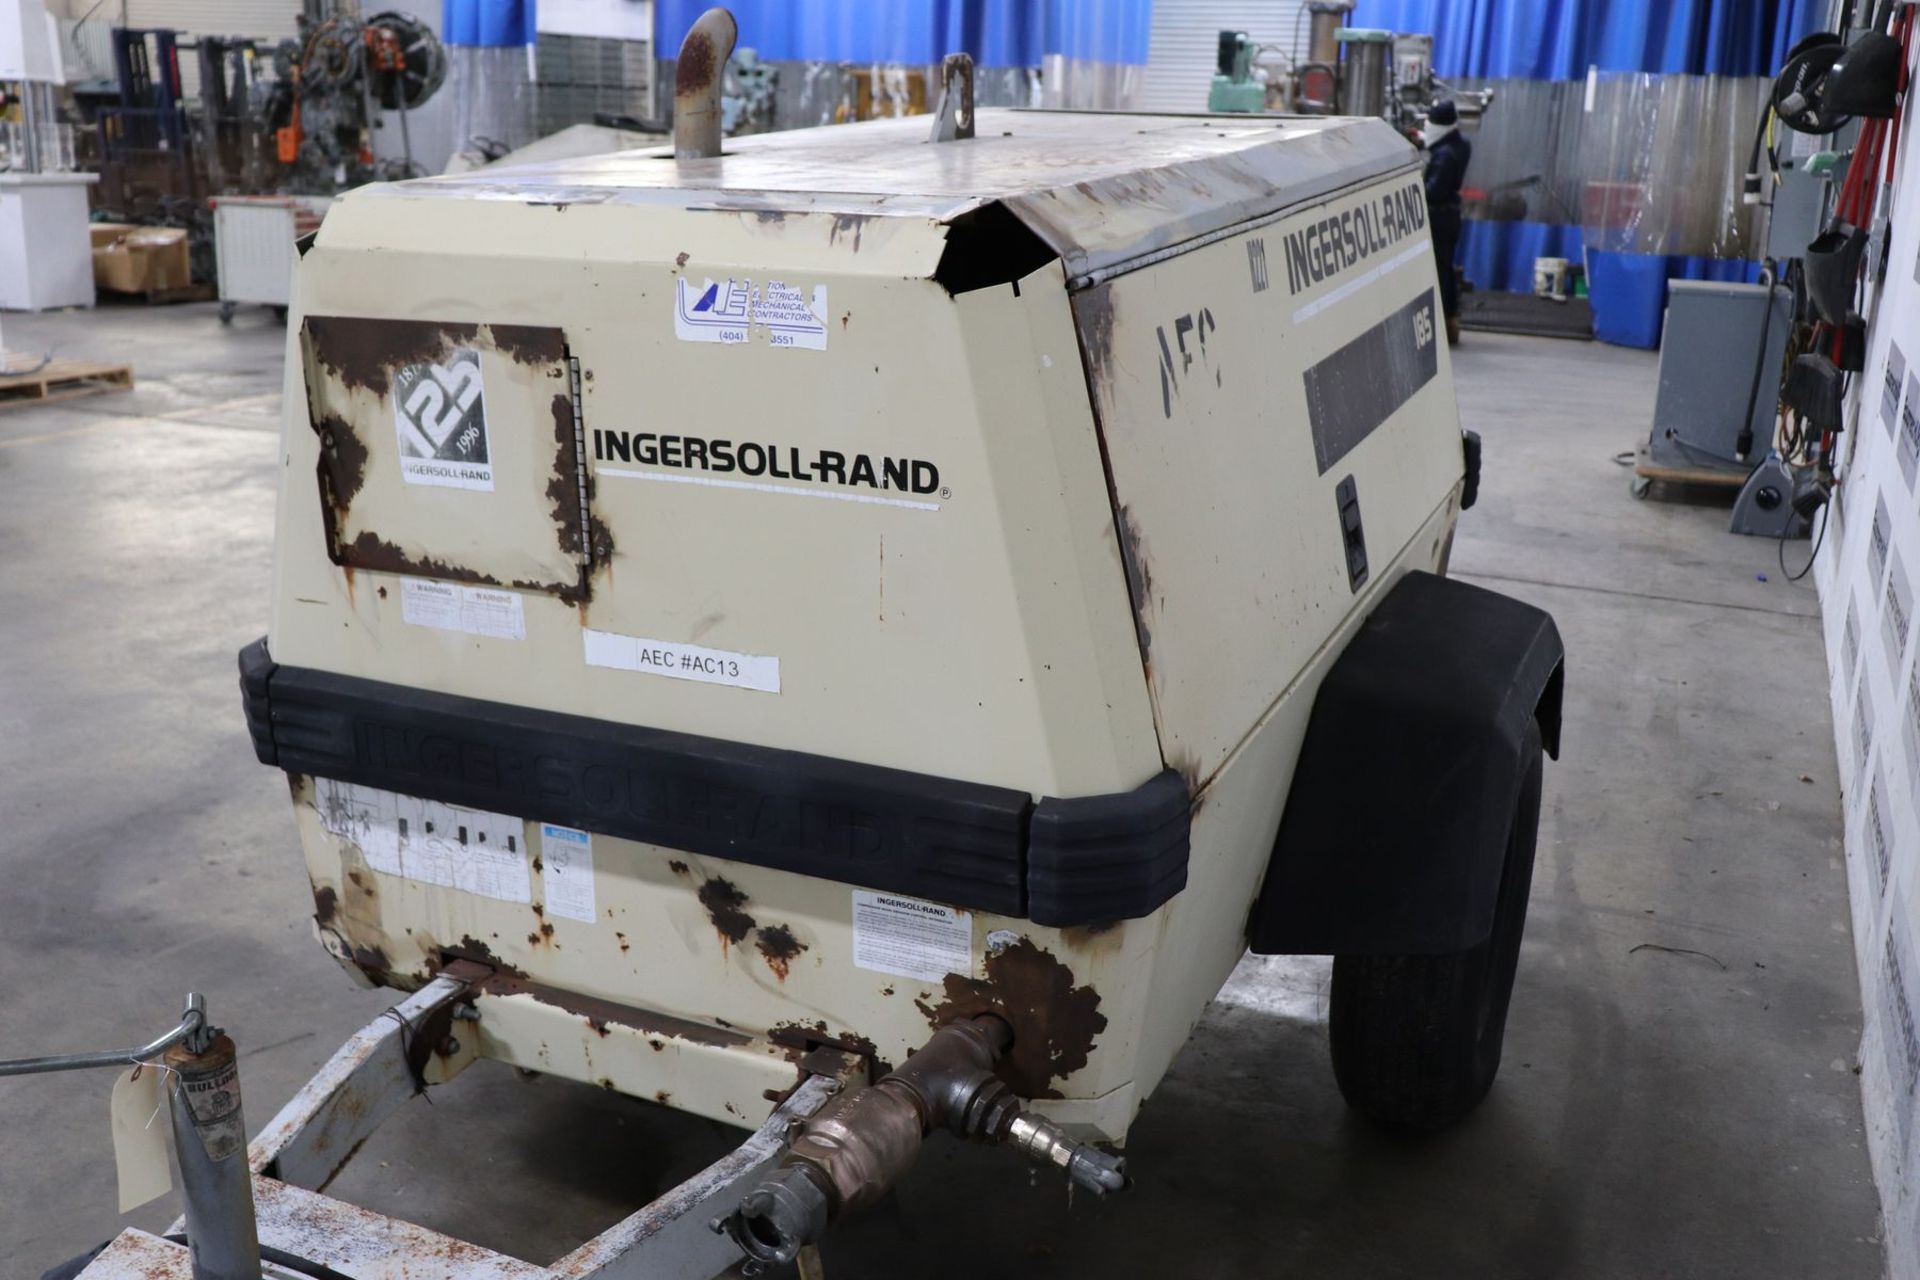 Ingersoll Rand P185WJD 185 CFM Portable Towable Air Compressor - Image 11 of 14